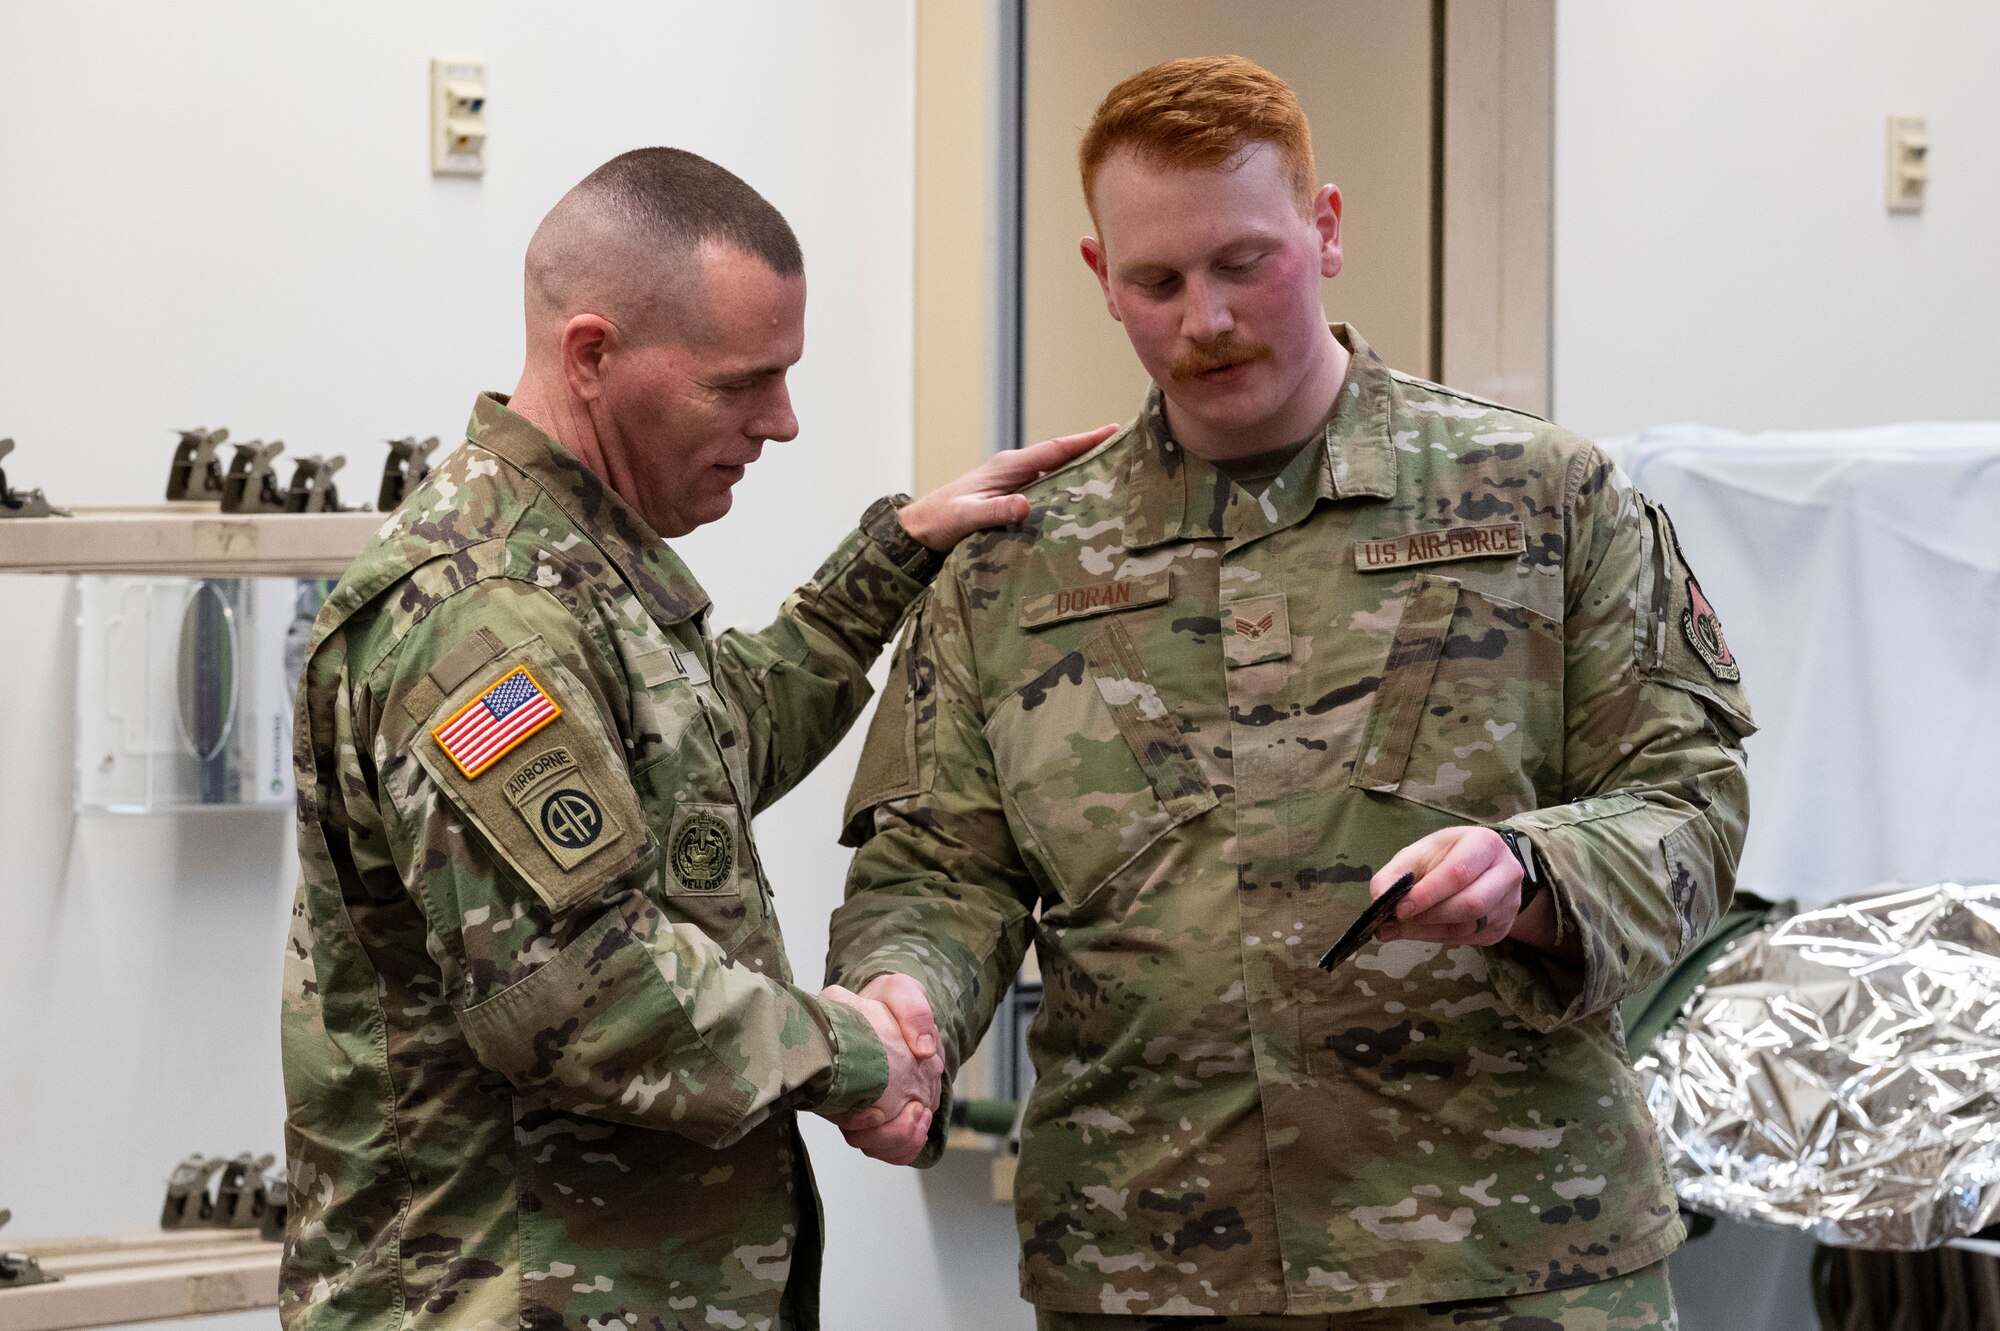 Army Command Sgt. Maj. Jack Love, U.S. Forces Korea Senior Enlisted Advisor, receives a 51st Medical Group (MDG) Patch from U.S. Air Force Senior Airman Johnathan Doran, 51st MDG flight and operational medicine technician during his visit at Osan Air Base, Republic of Korea, Feb. 16, 2023.